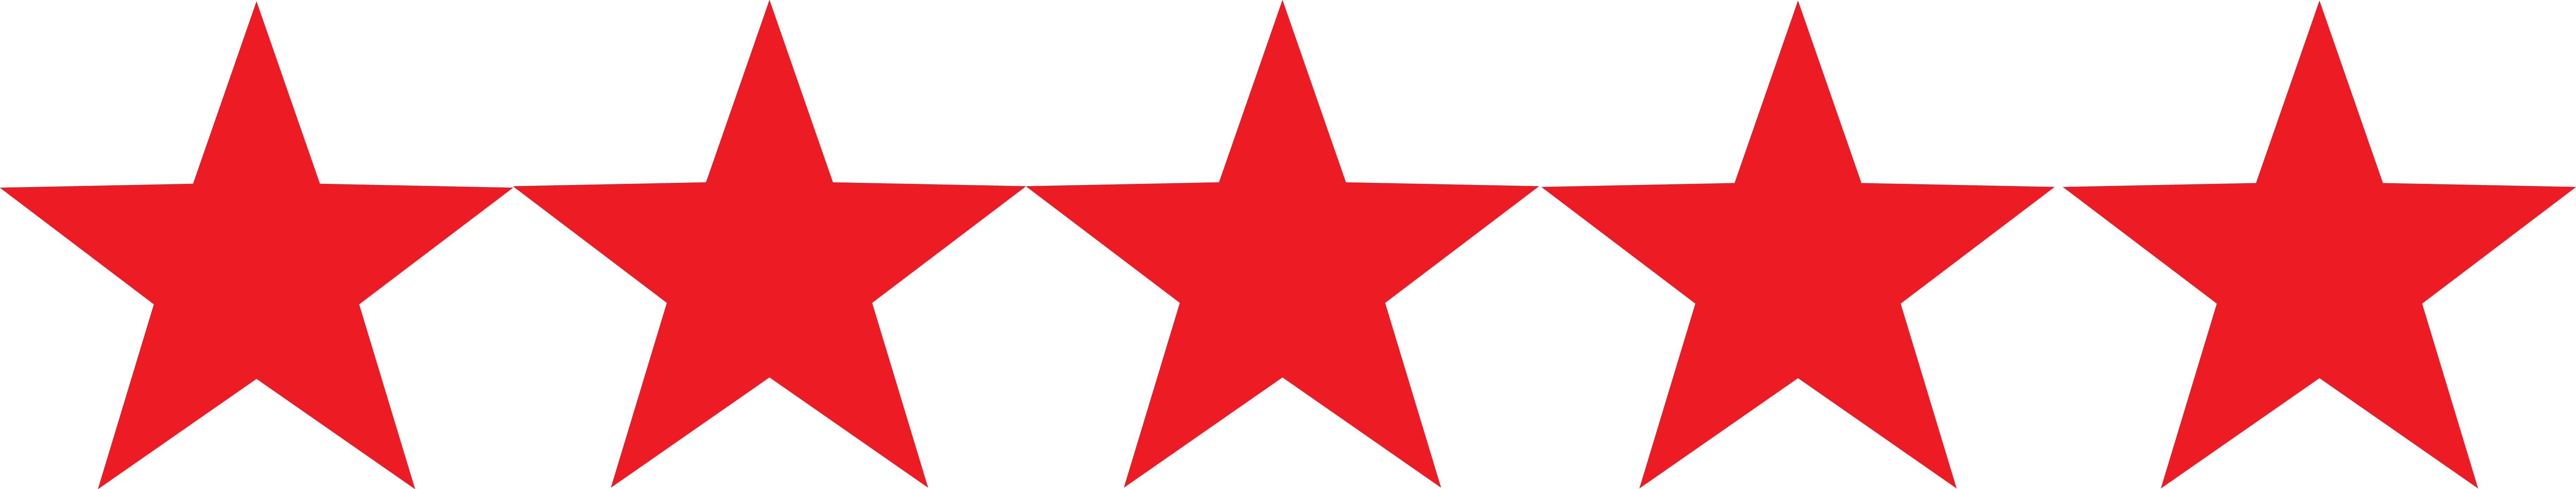 Star Rating Png Transparent Images Pictures Photos Png Arts